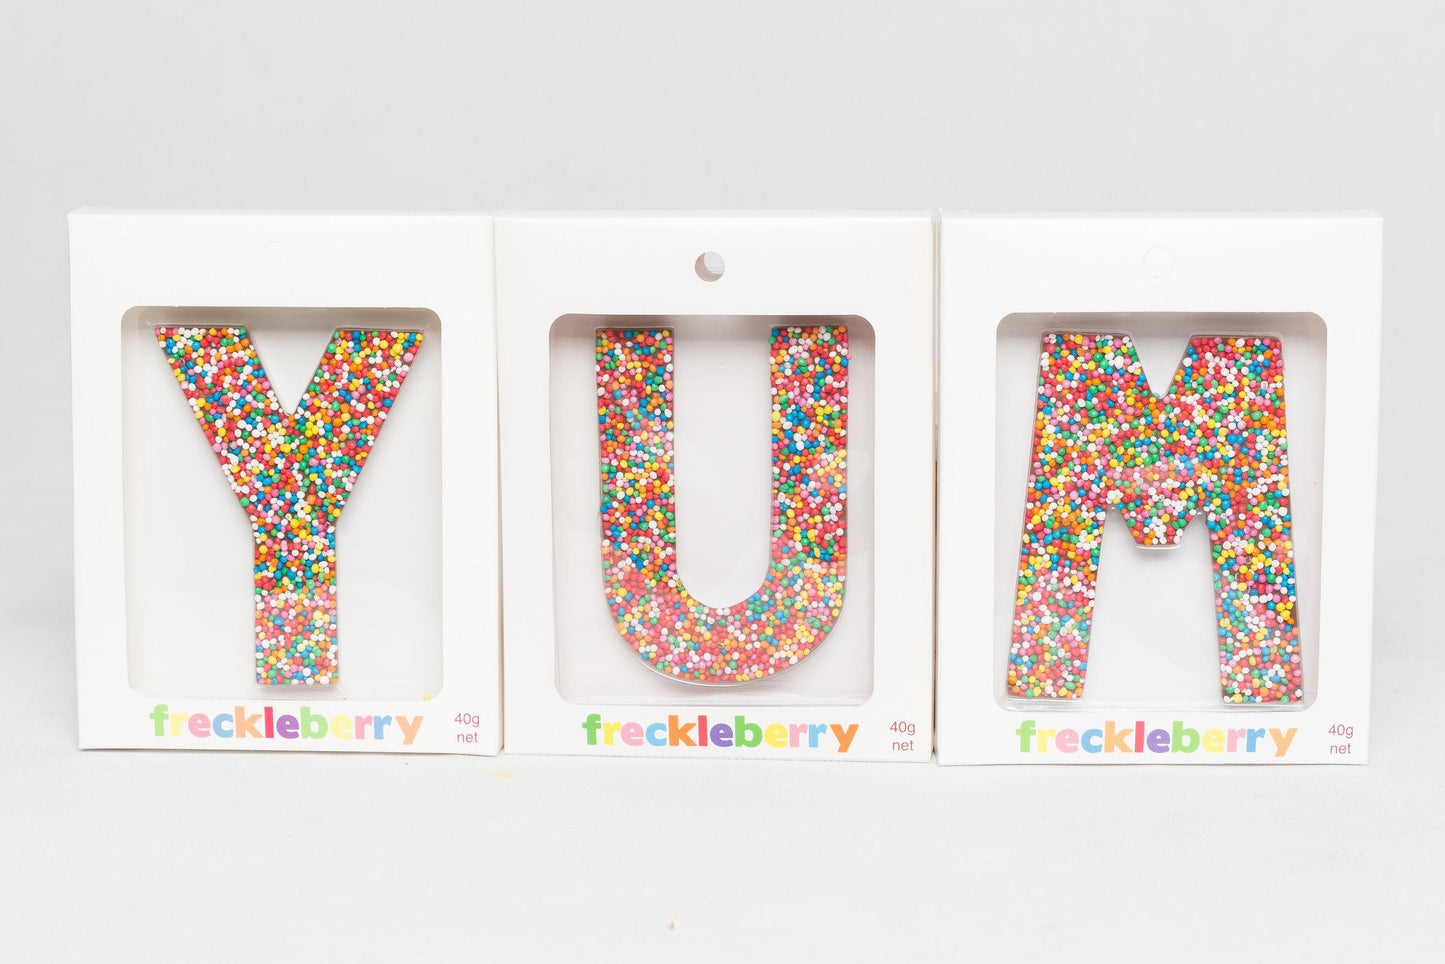 Freckleberry Letters and Numbers